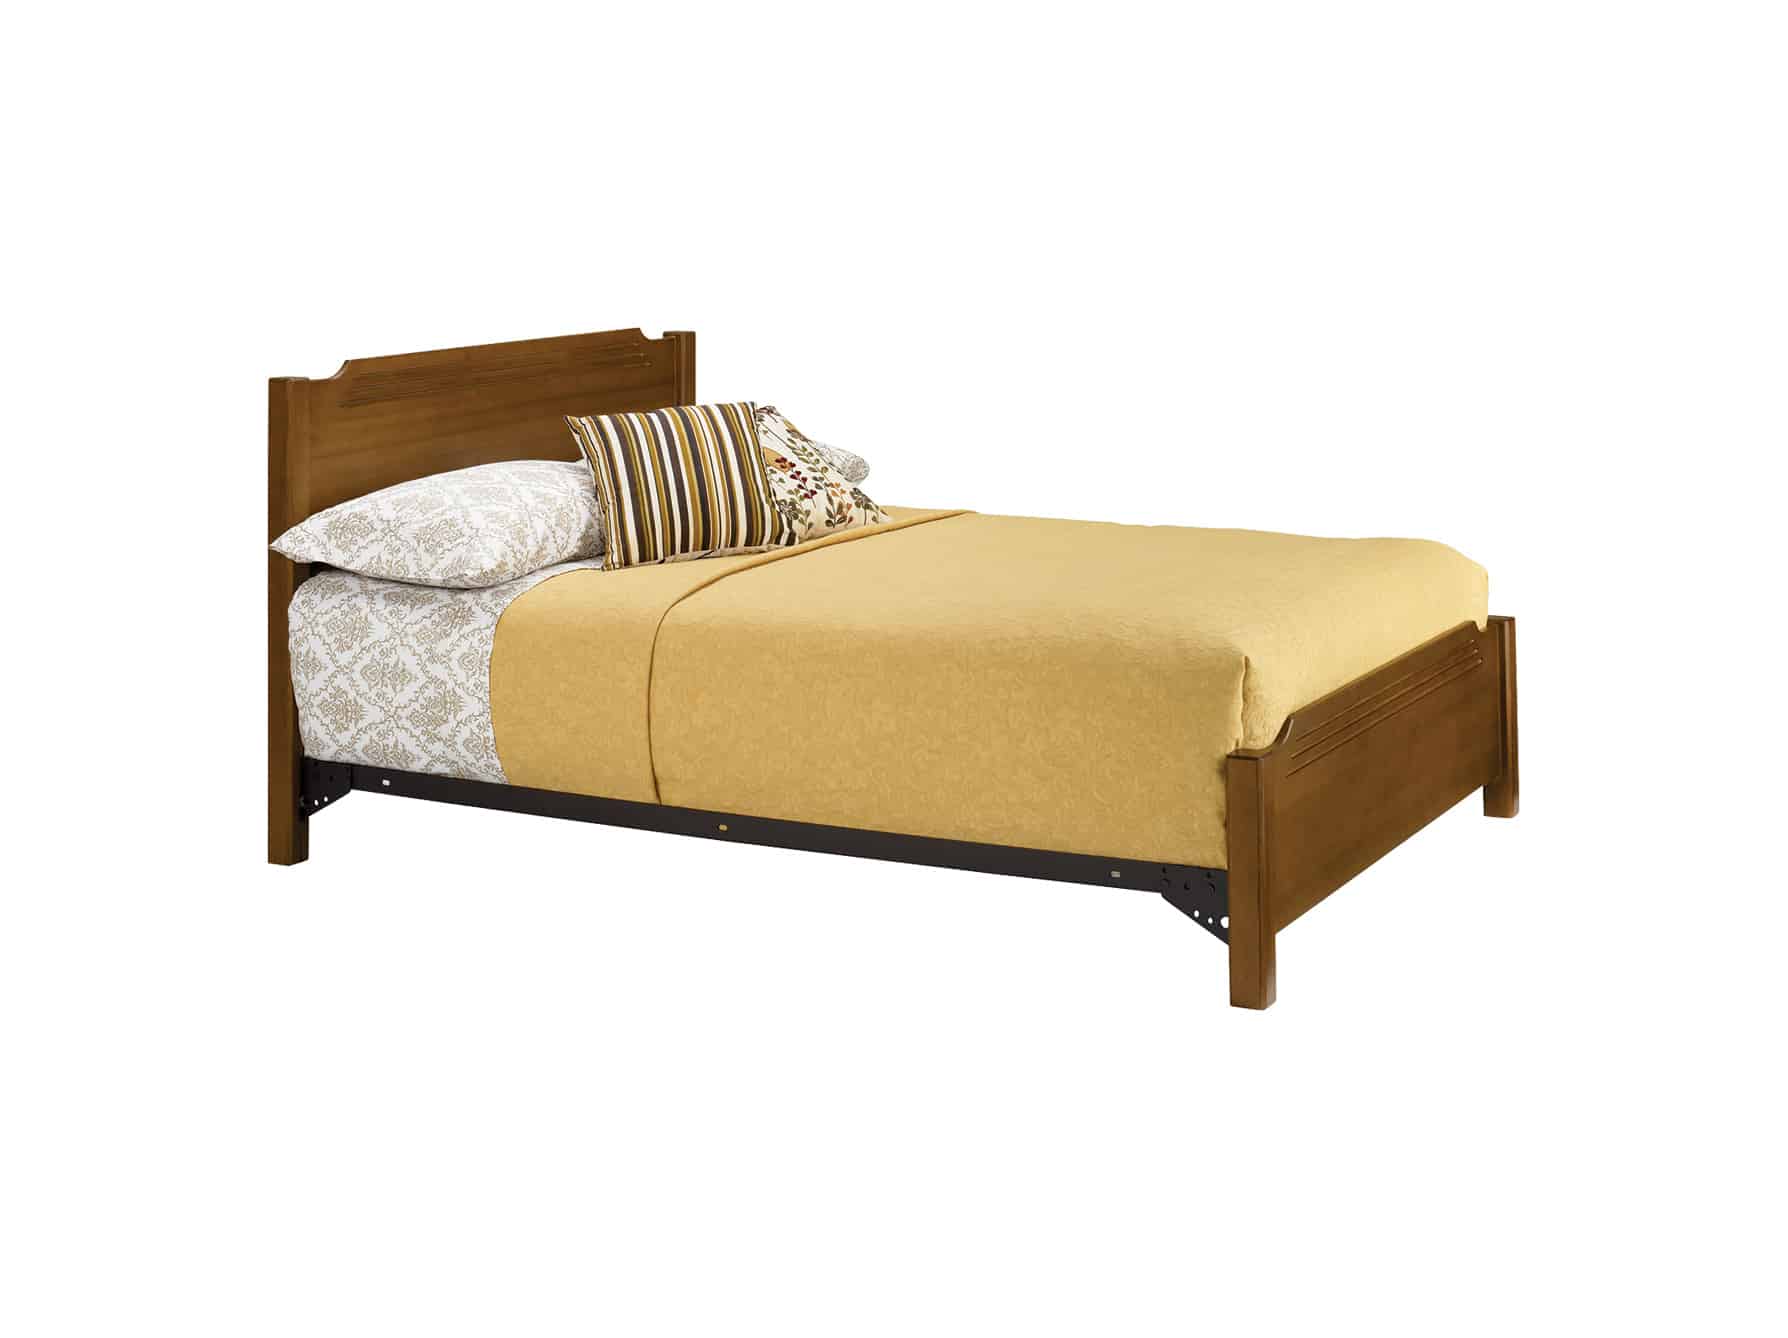 Espresso Double Bed, with Side Rails